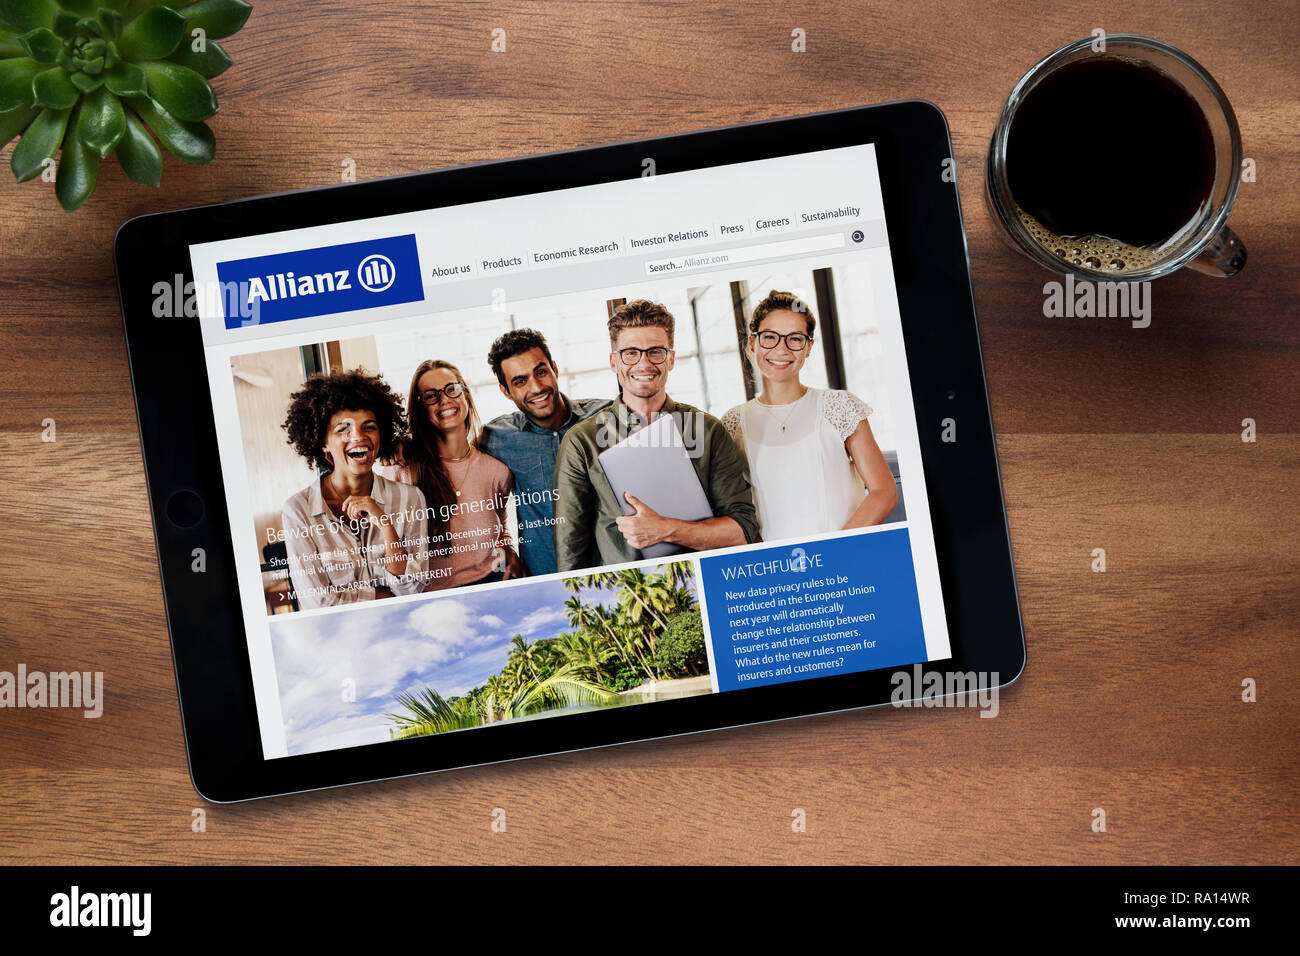 The website of Allianz insurance is seen on an iPad tablet, on a wooden table along with an espresso coffee and a house plant (Editorial use only). Stock Photo